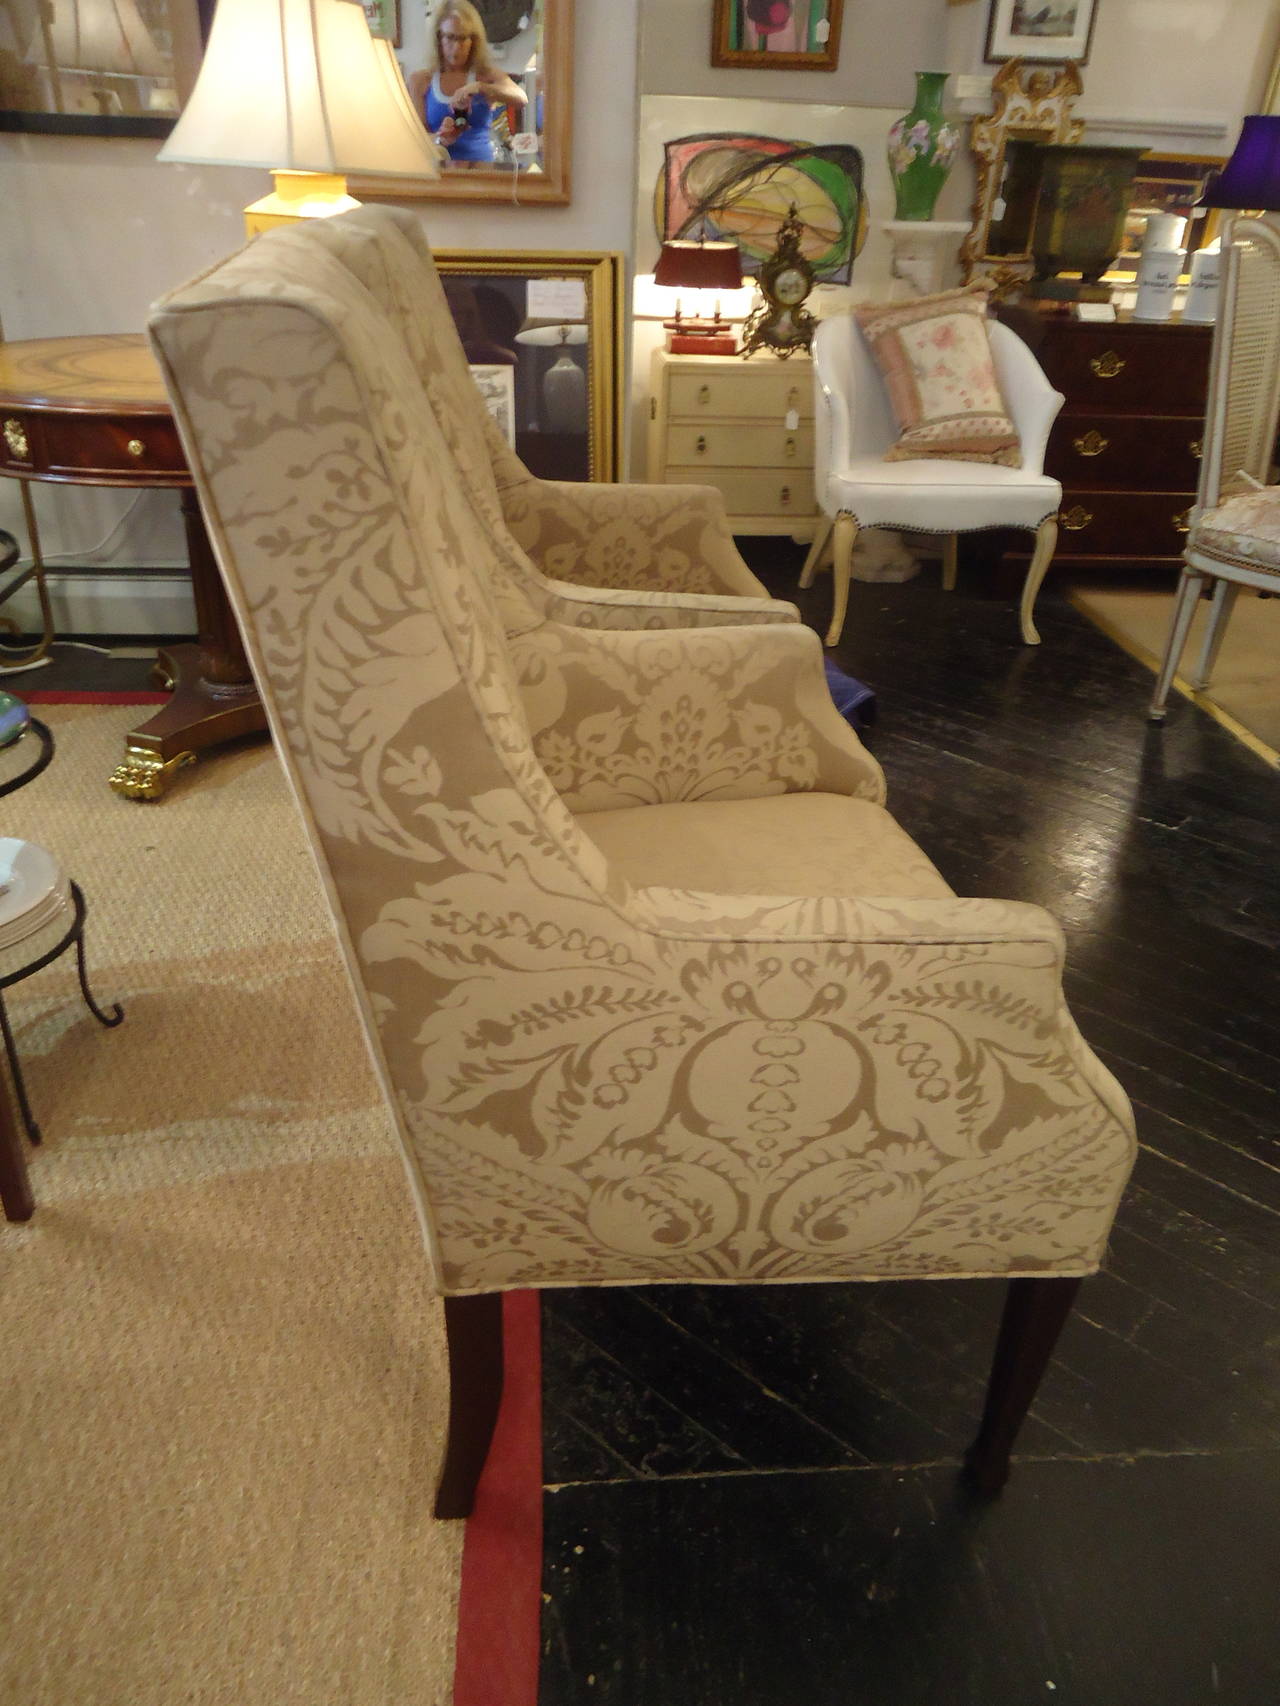 Vintage armchairs or fireside chairs, updated in a neutral beige/taupe Lee Jofa patterned fabric.  Mahogany legs.